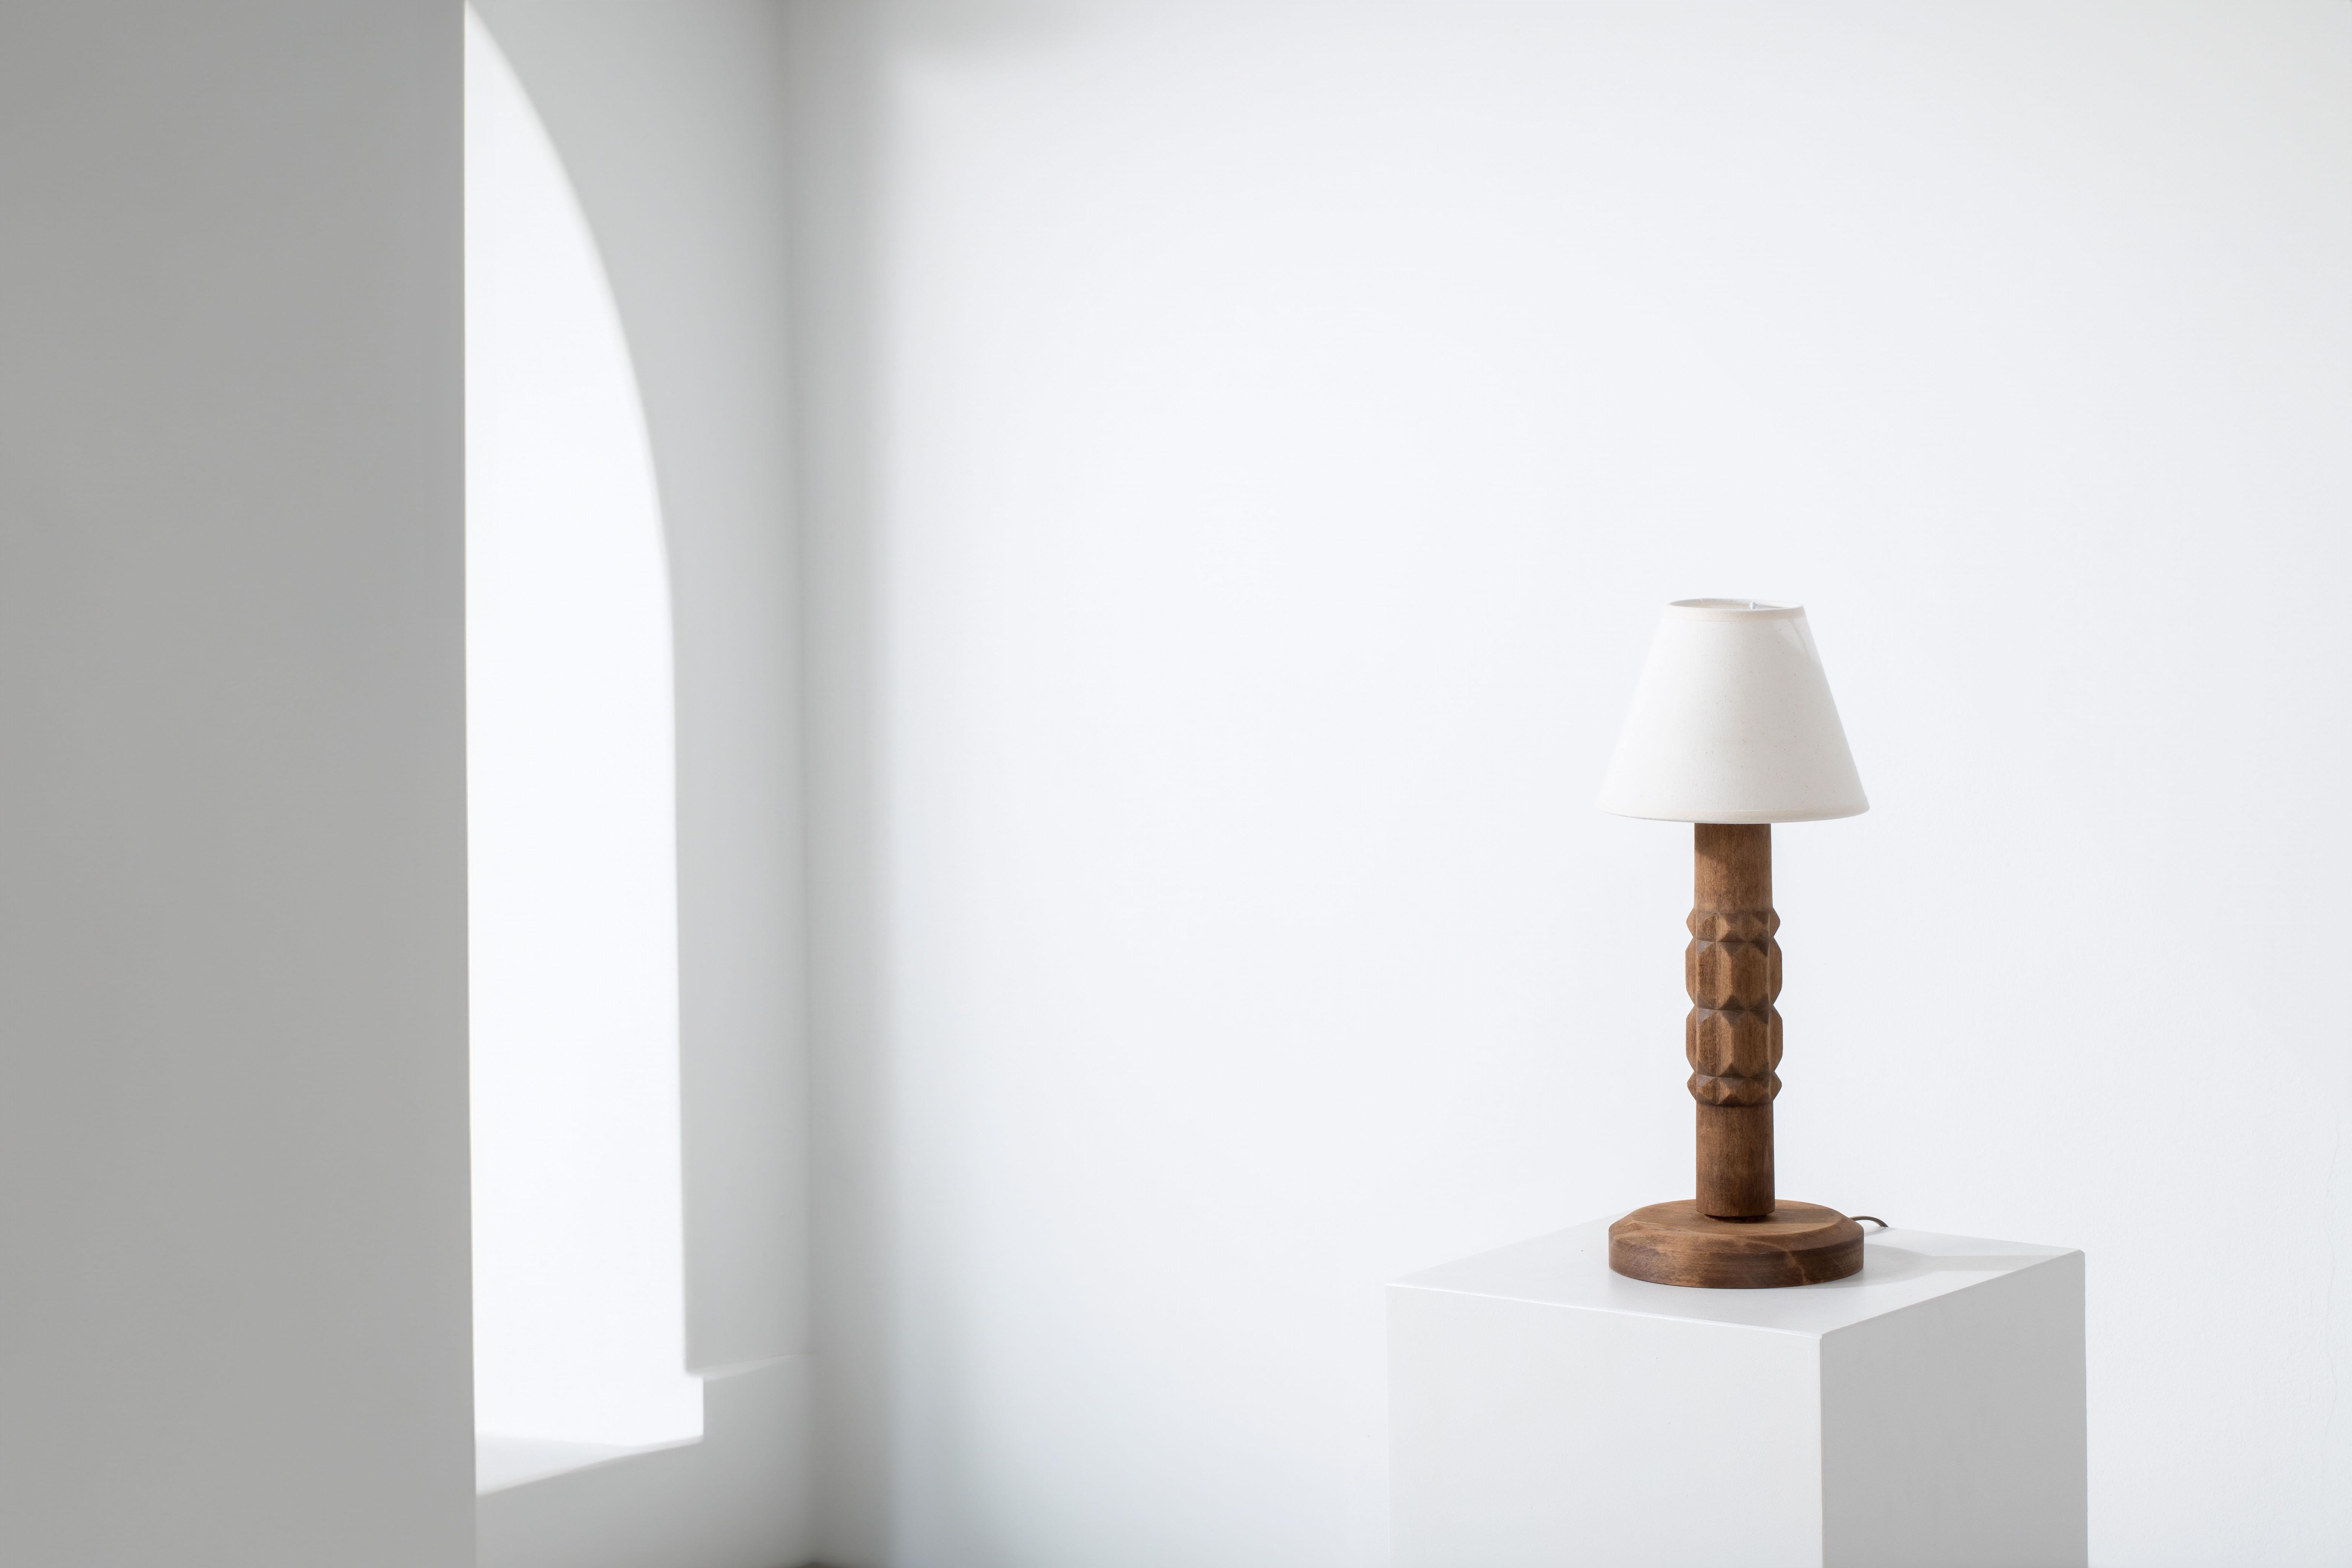 Elegant Handcarved Table Lamp: A Dudouyt-Inspired Masterpiece from the 1940s

Step into the refined elegance of the 1940s with this exquisite handcarved table lamp, reminiscent of the iconic style of Charles Dudouyt. This lamp is a testament to the